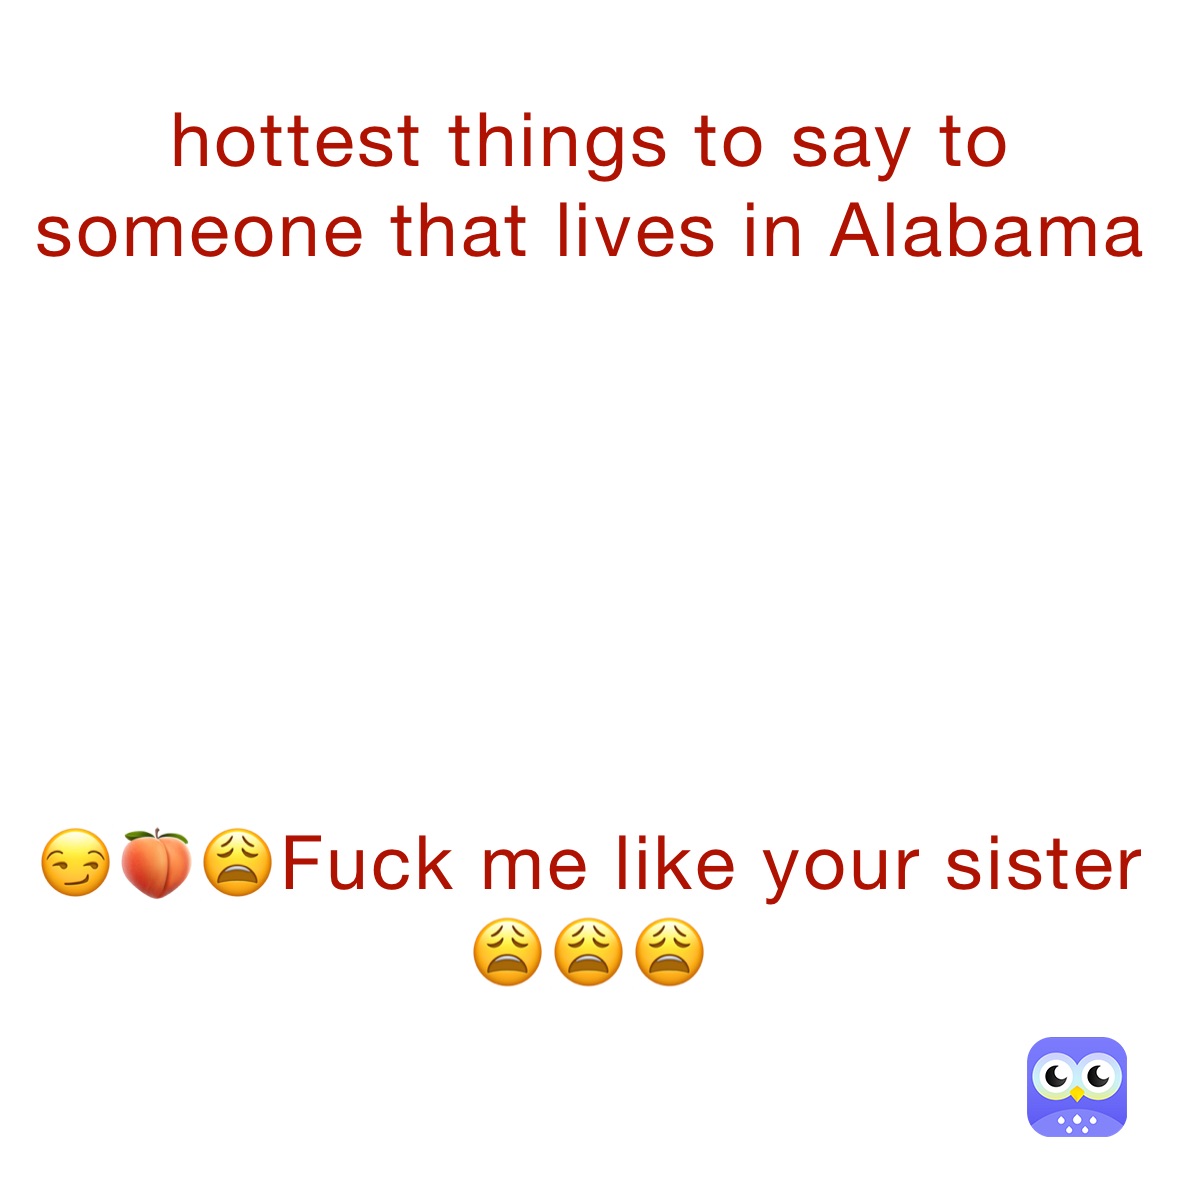 hottest things to say to someone that lives in Alabama






😏🍑😩Fuck me like your sister😩😩😩
